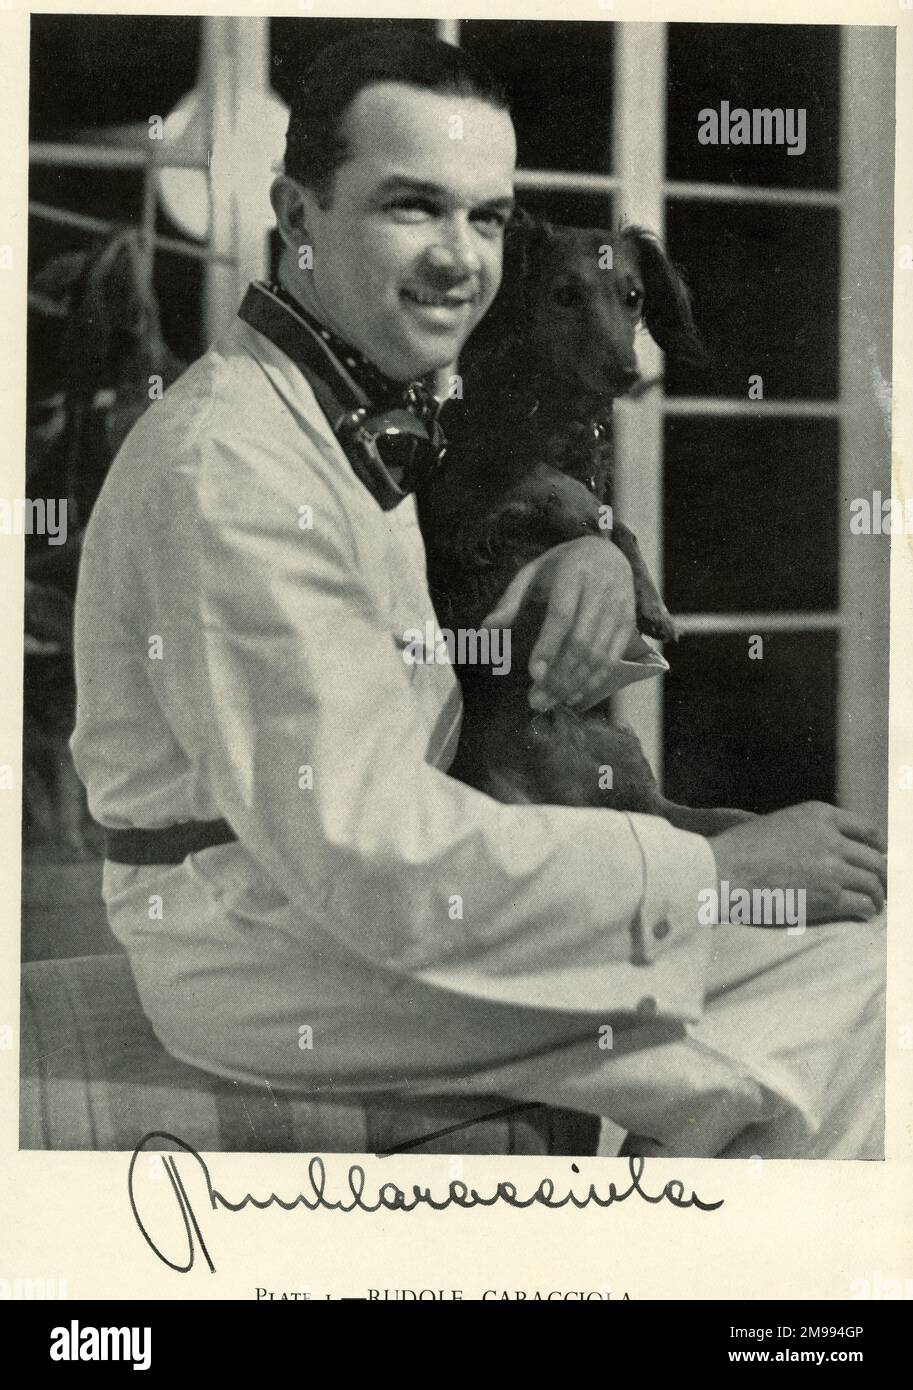 Otto Wilhelm Rudolf Caracciola (1901-1959), German racing driver, seen here in a portrait photo with his dog. Stock Photo